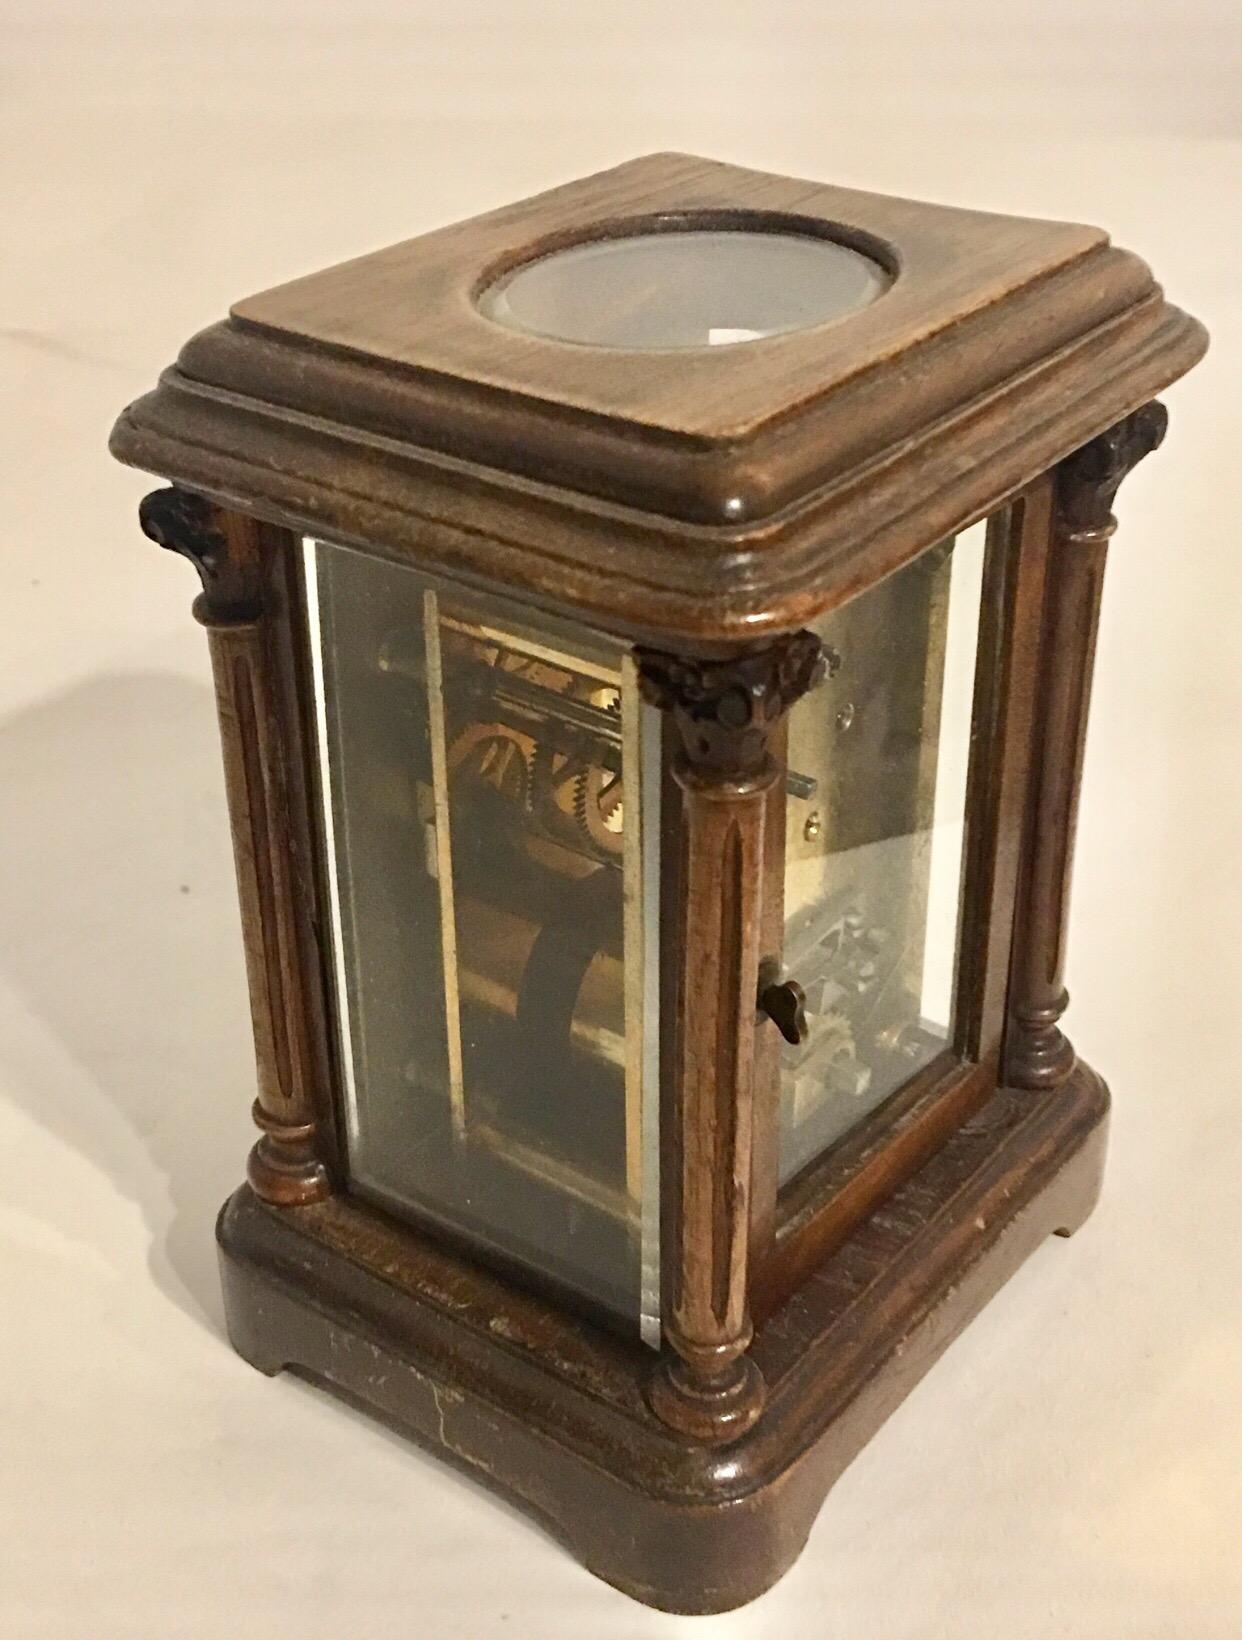 Rare Antique Timepiece Wooden Mantel / Carriage Clock For Sale 3